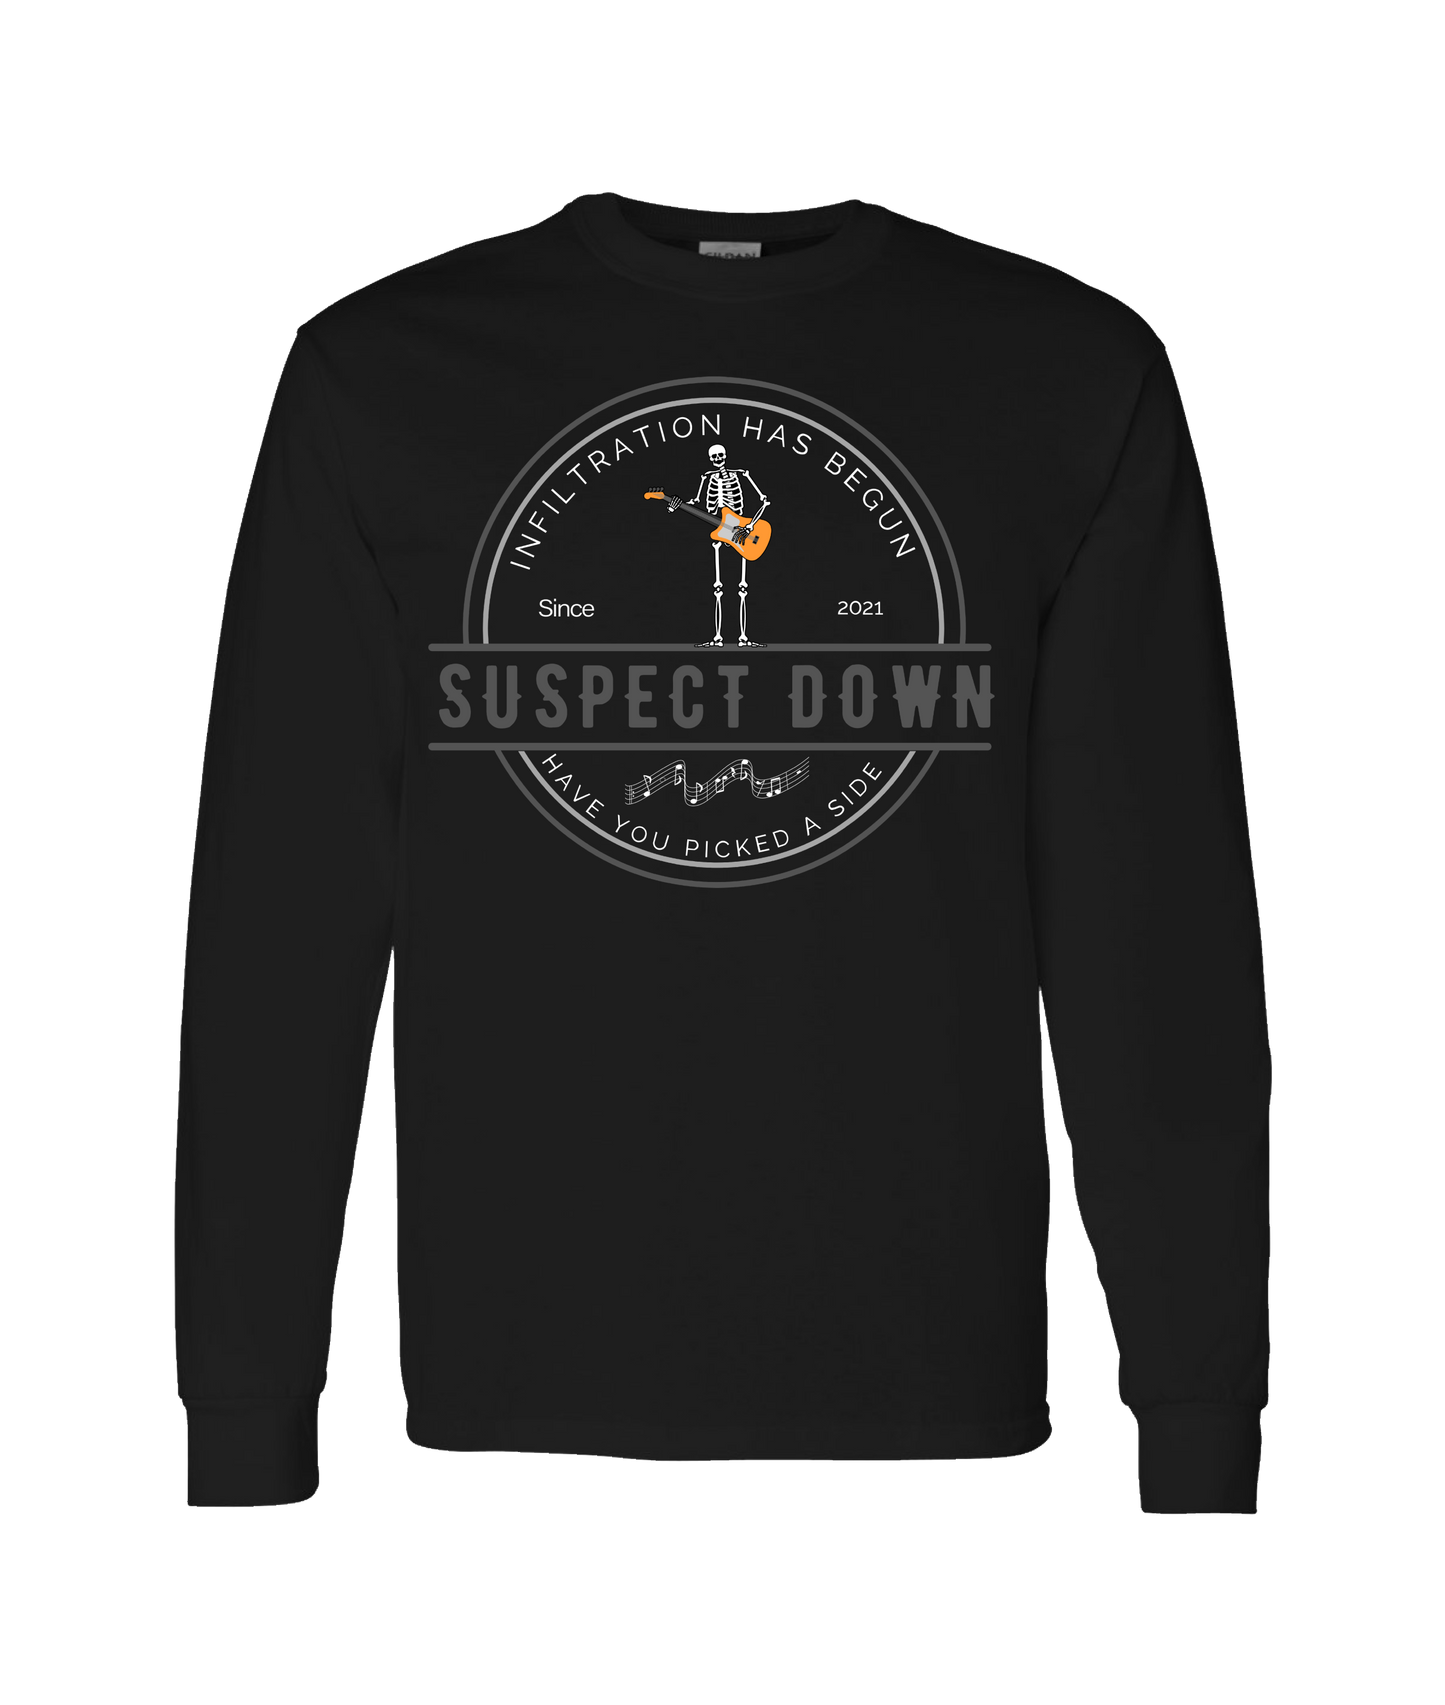 Suspect Down - INFILTRATION - Black Long Sleeve T